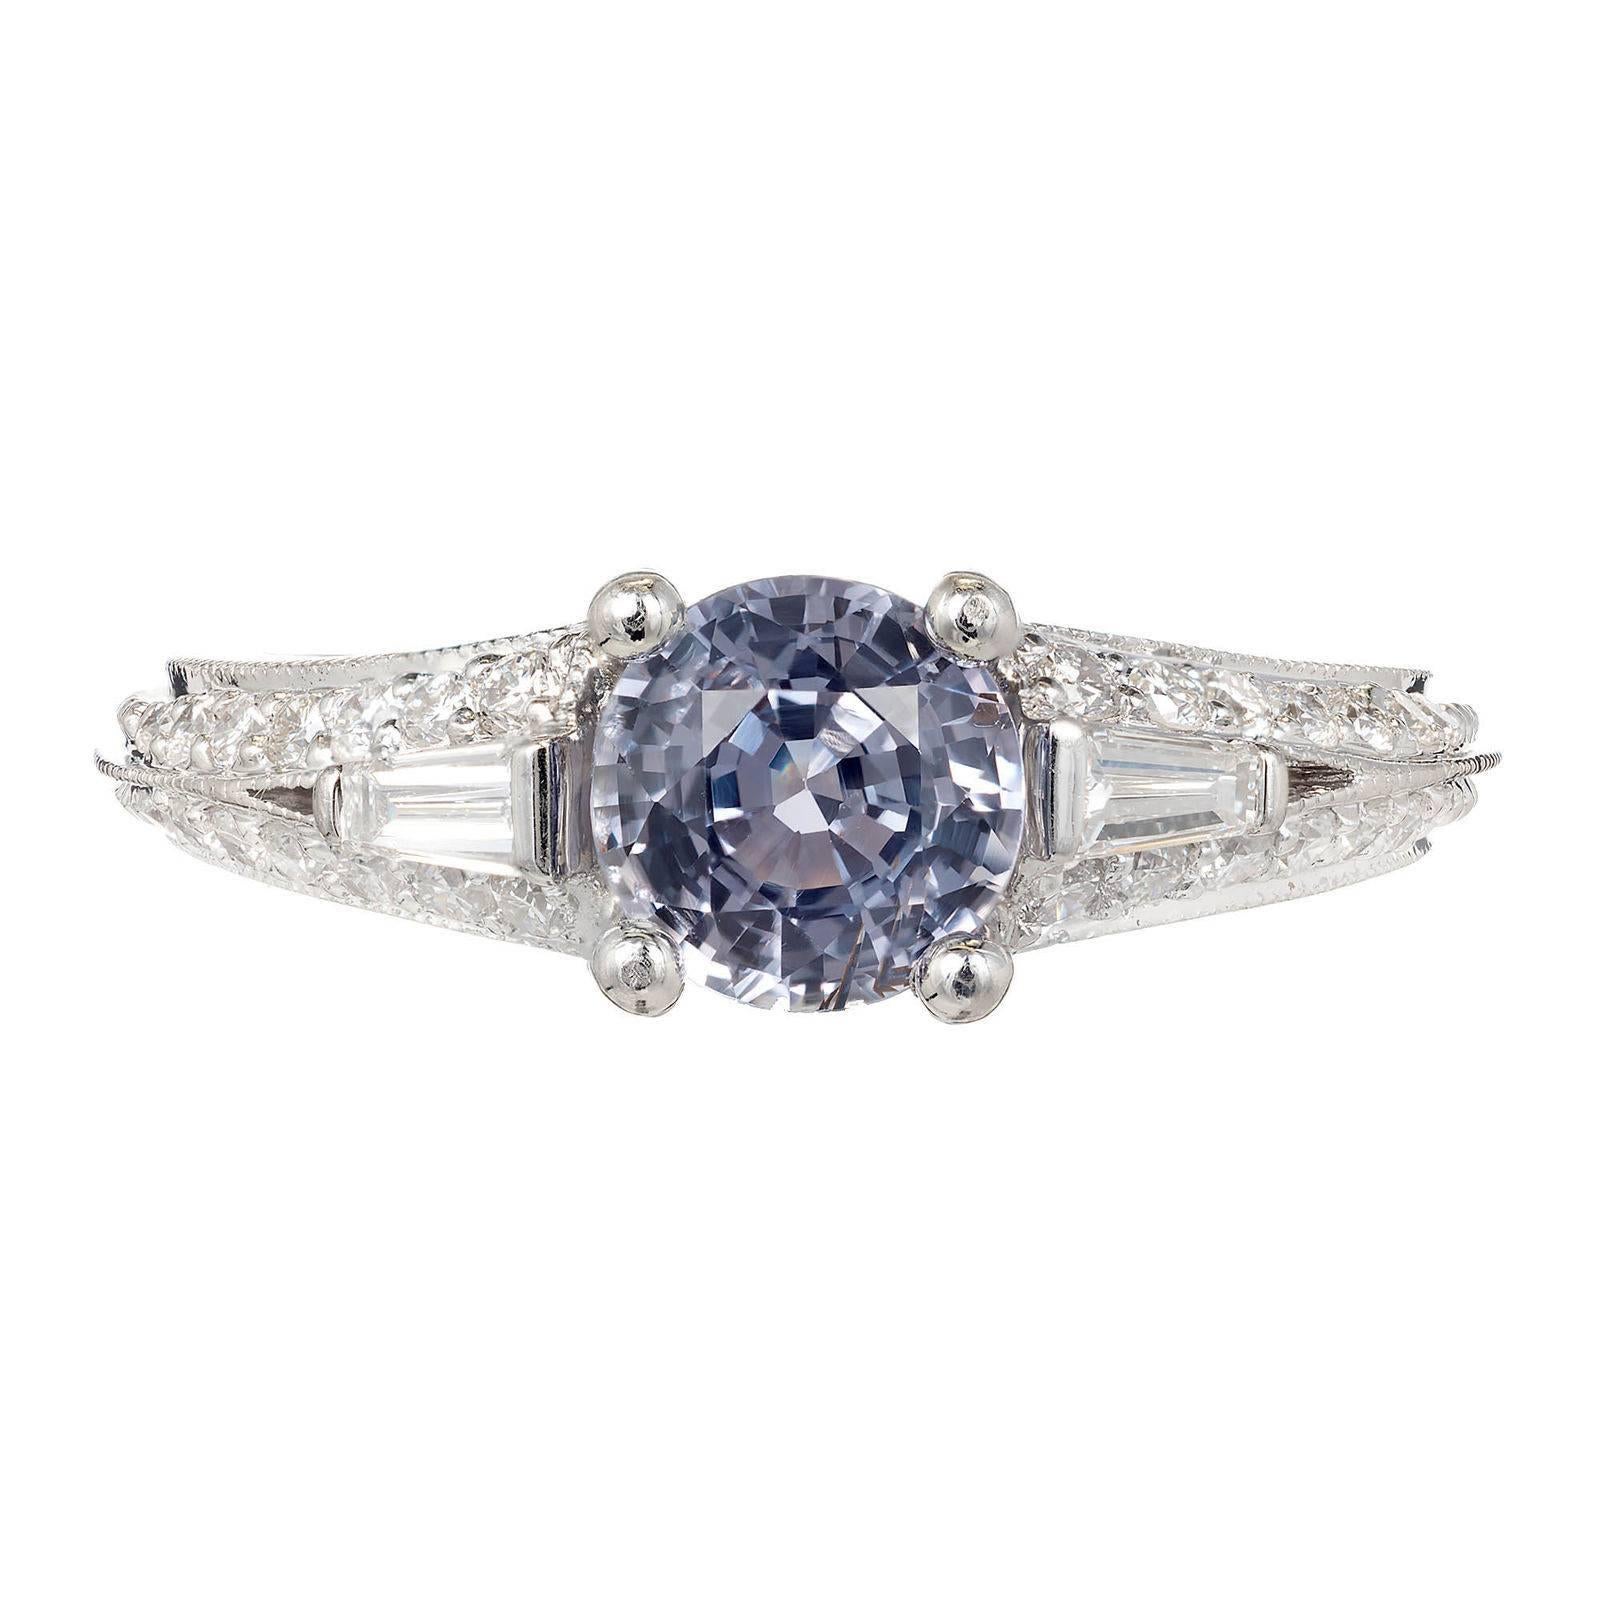 Peter Suchy GIA Certified, old European cut, color change Sapphire and diamond engagement ring. The  1.06cts center stone Changes color from violet blue to light pinkish purple in different lights. The Sapphire is from a 1900’s estate. The ring is